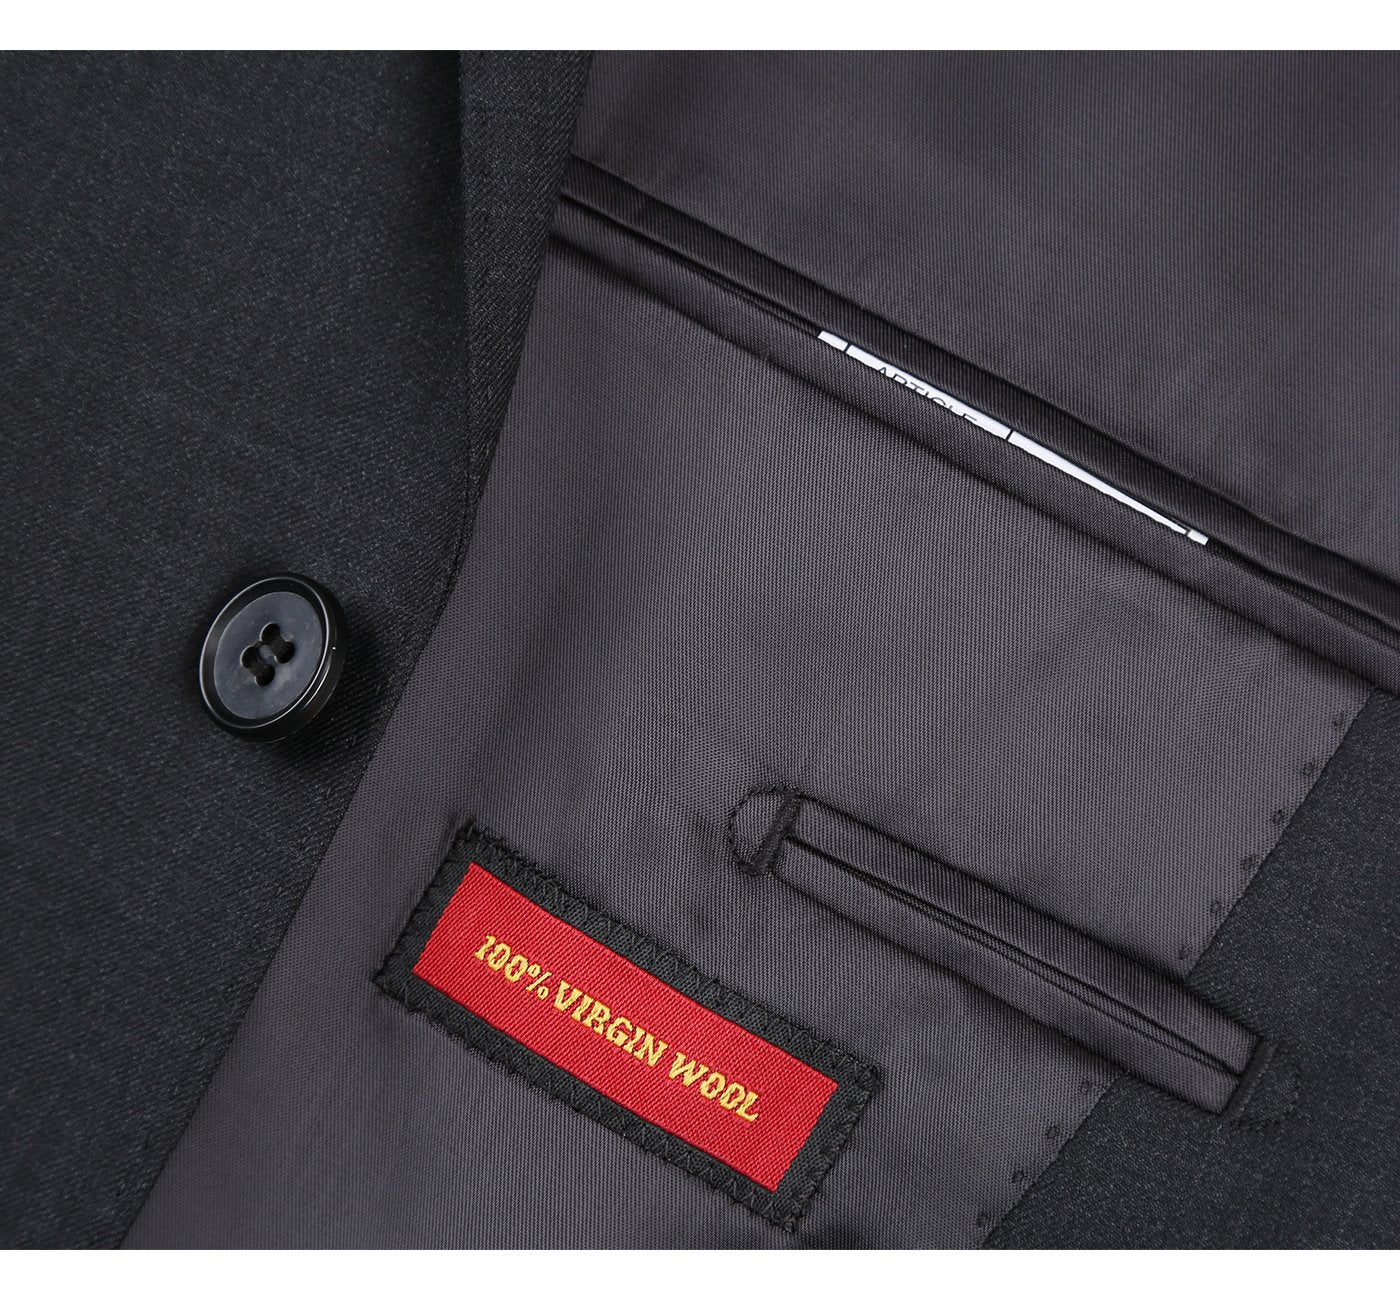 Super 140s Wool 2-Button CLASSIC FIT Suit in Charcoal (Short, Regular, and Long Available) by Renoir